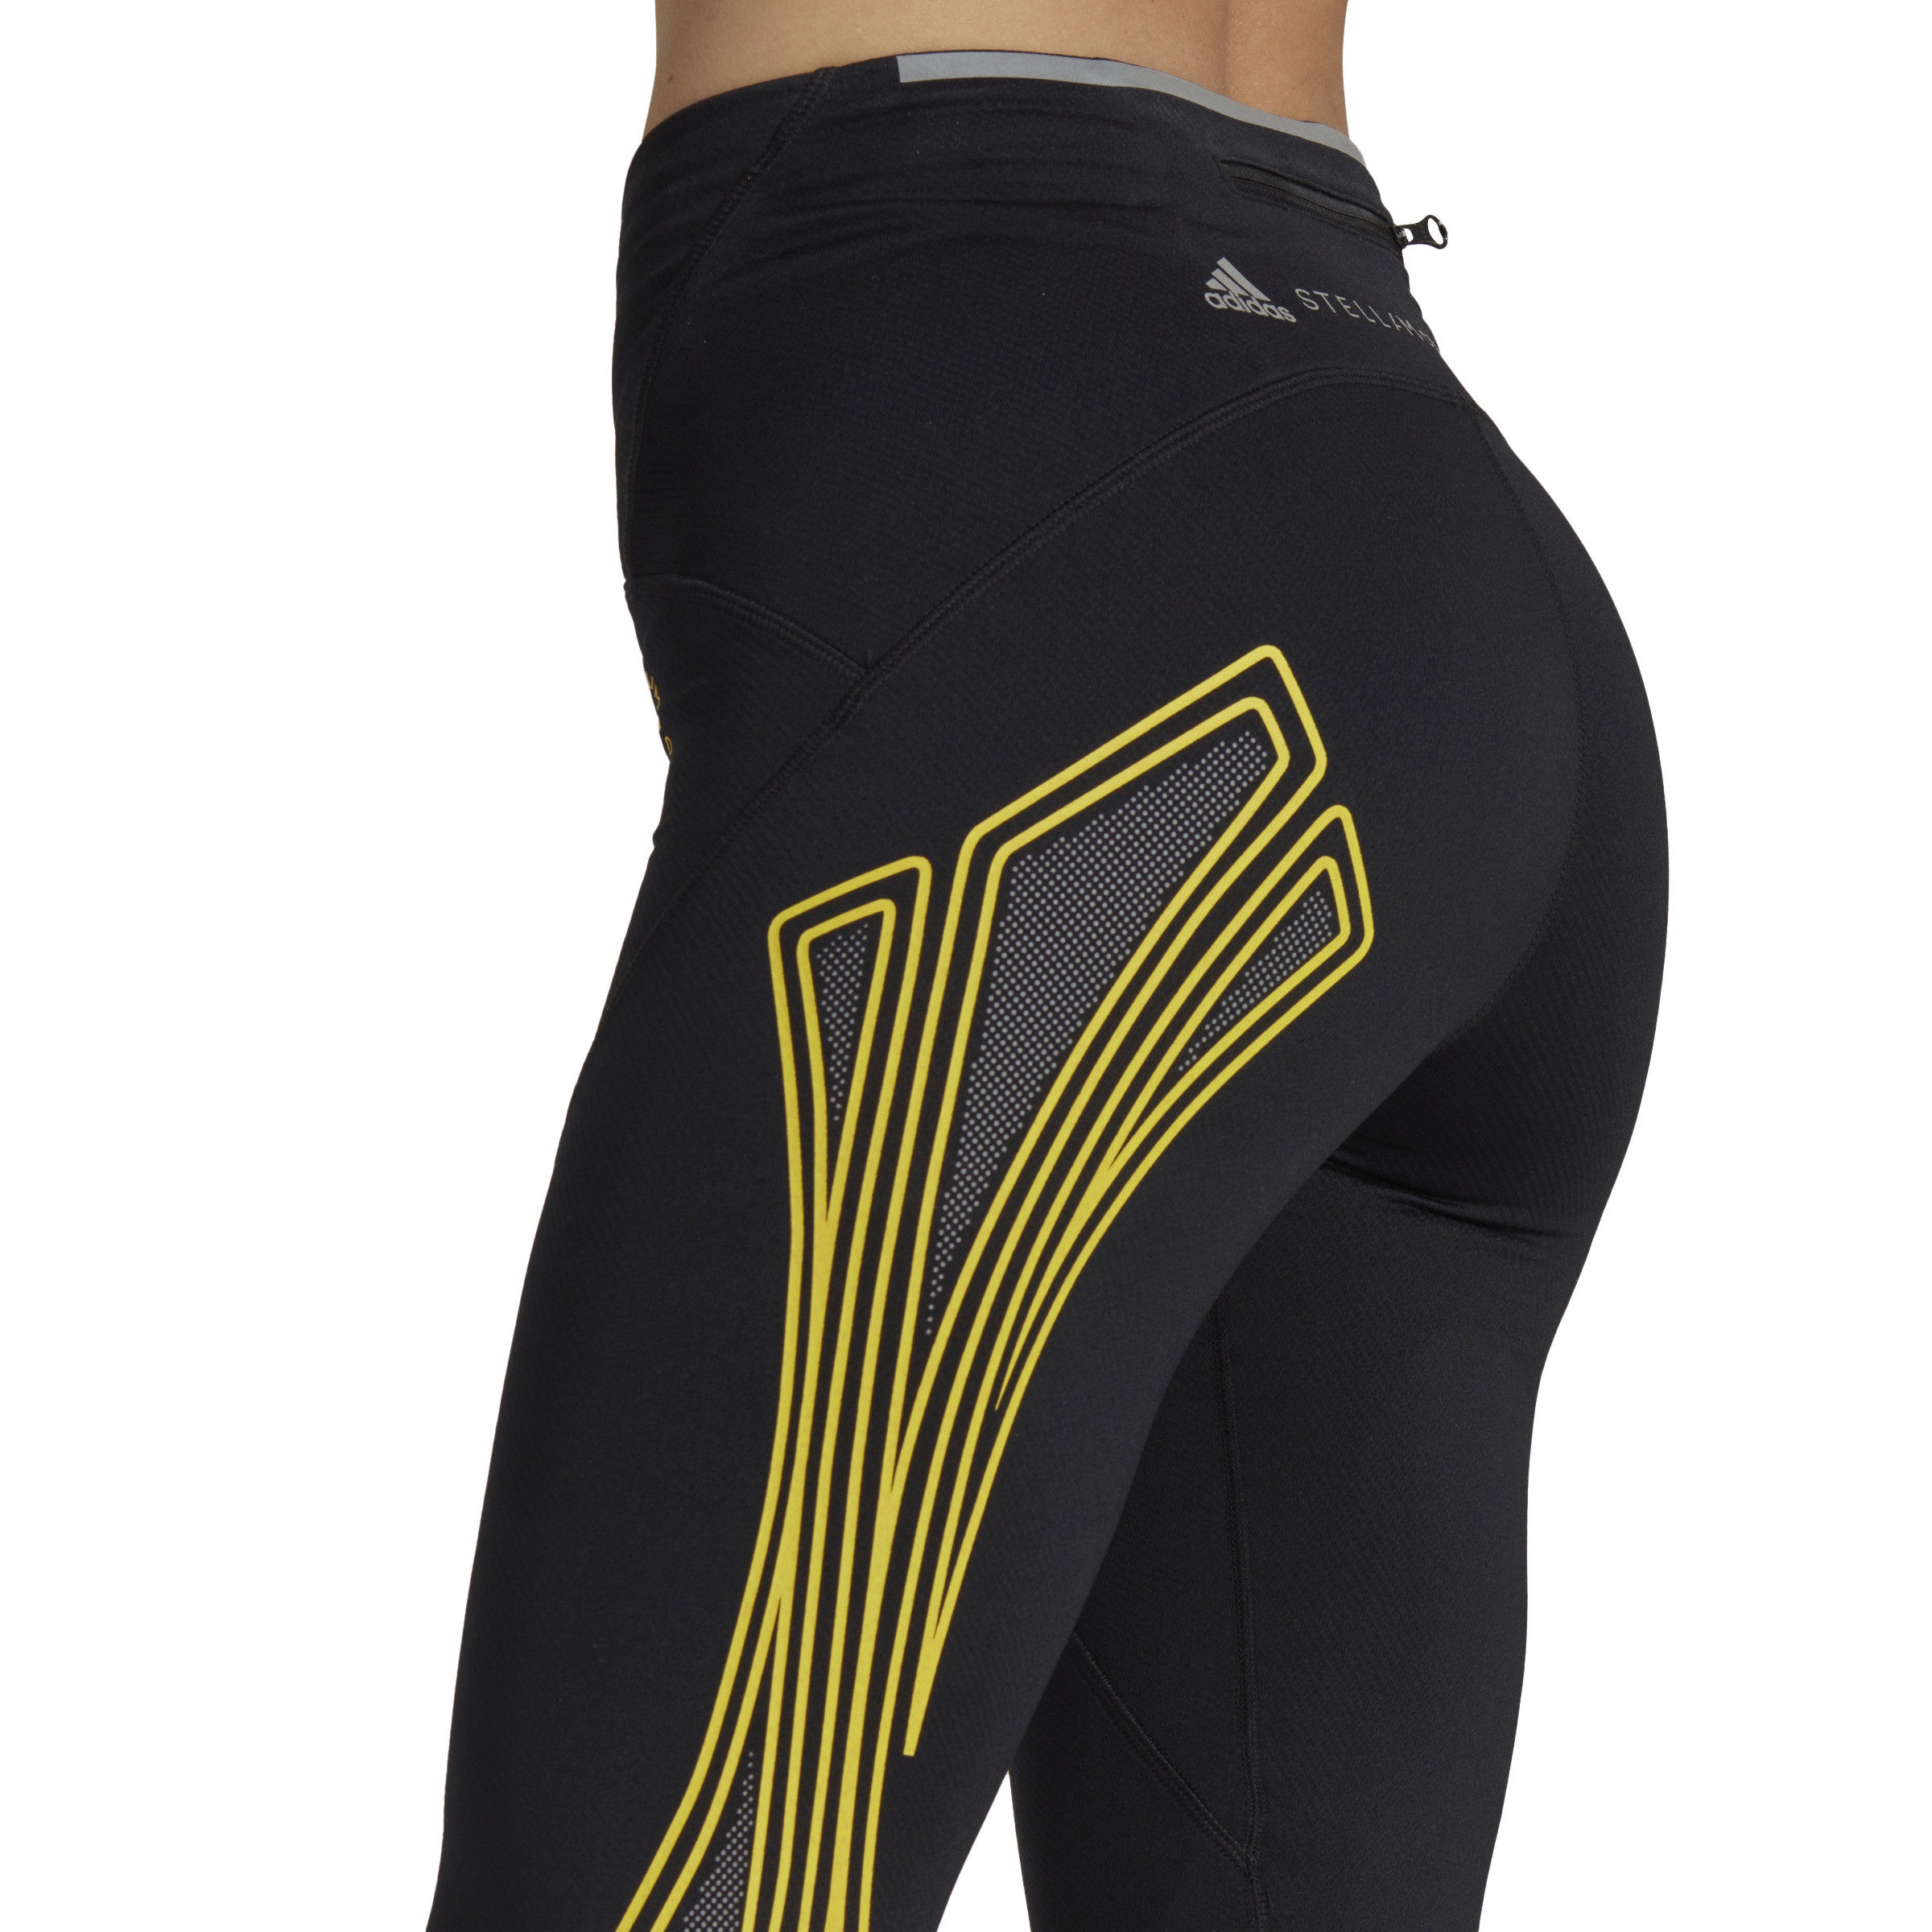 Adidas by Stella McCartney - TruePace COLD.RDY running leggings, Black, large image number 3